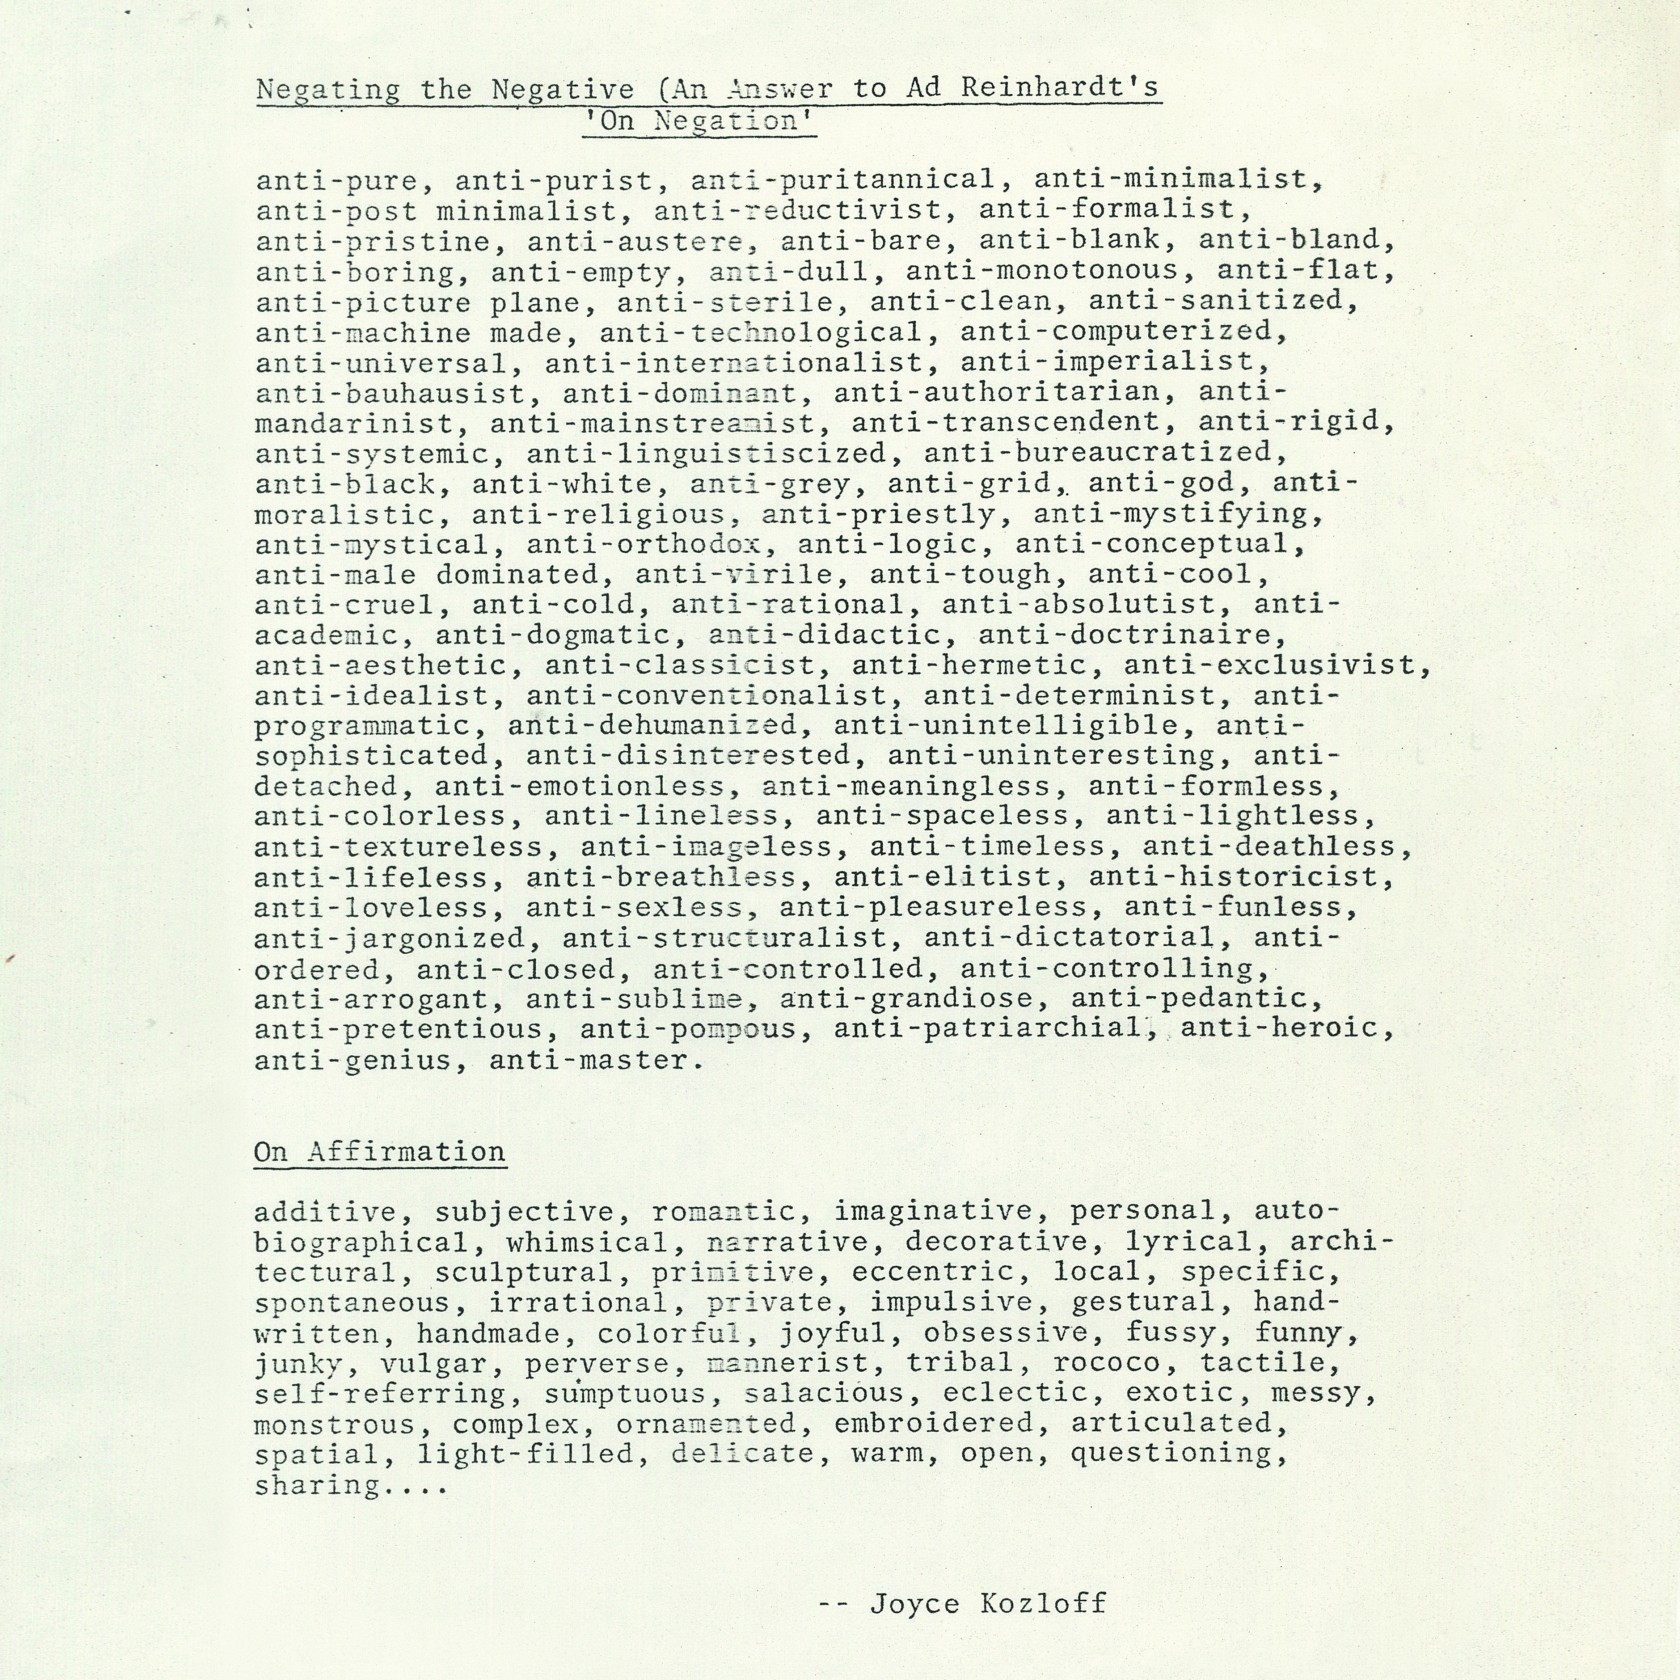 Joyce Kozloff, Negating the Negative (An Answer to Ad Reinhardt’s On Negation), 1976 and On Affirmation, 1976.